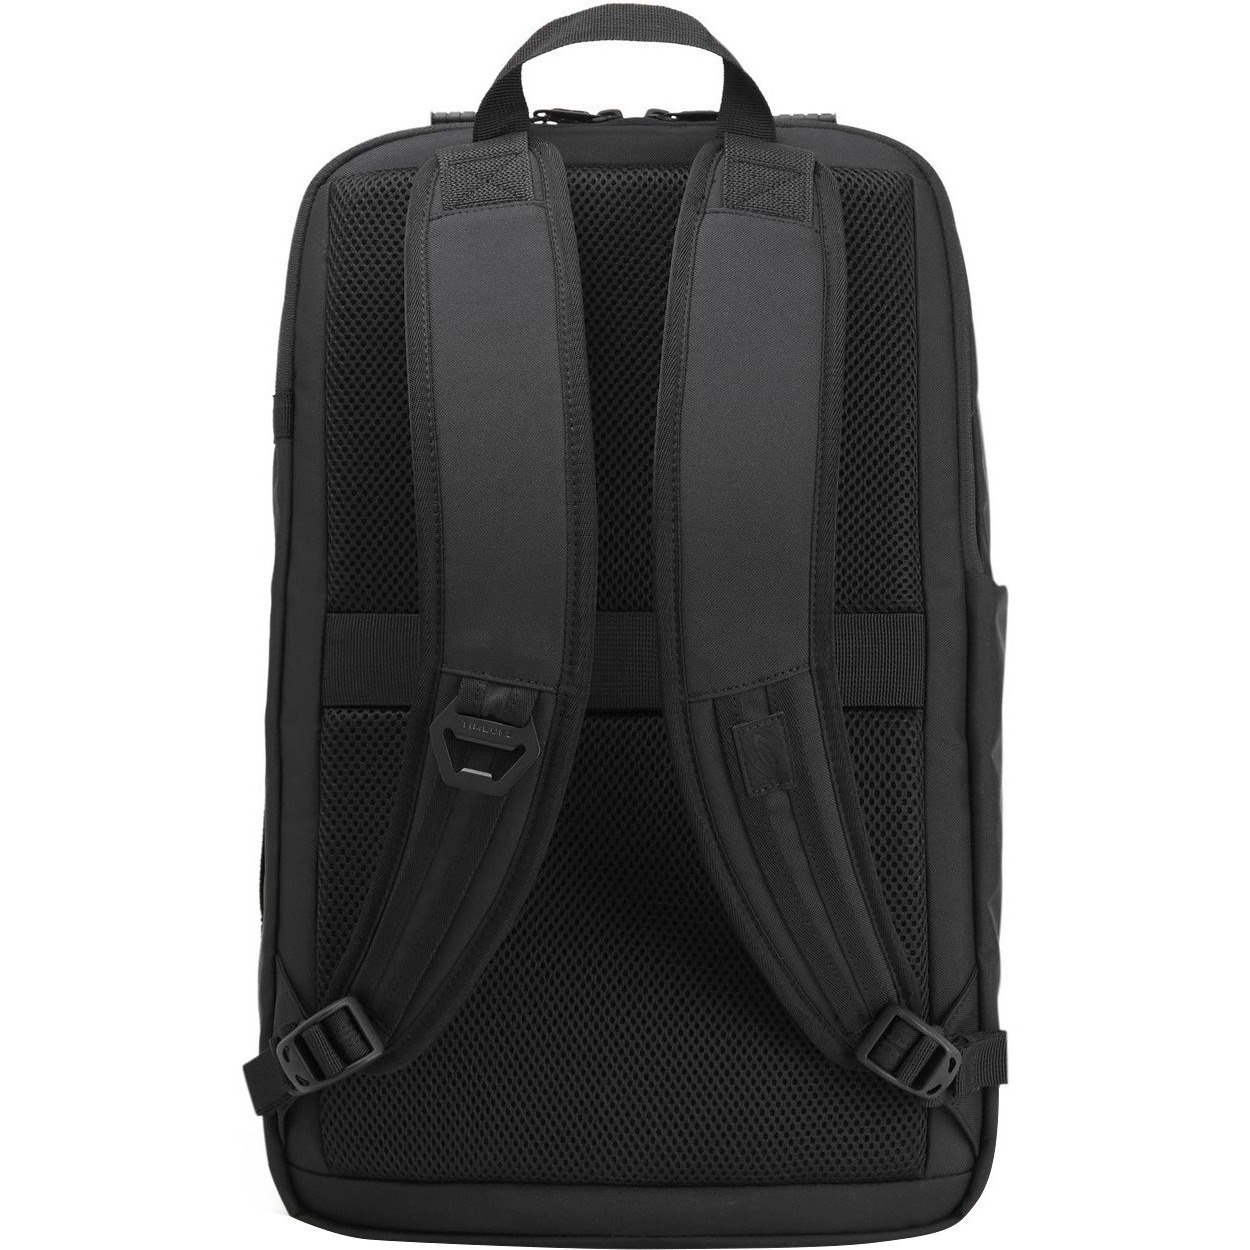 Timbuk2 Q 2.0 Carrying Case (Backpack) for 17" Notebook - Eco Black